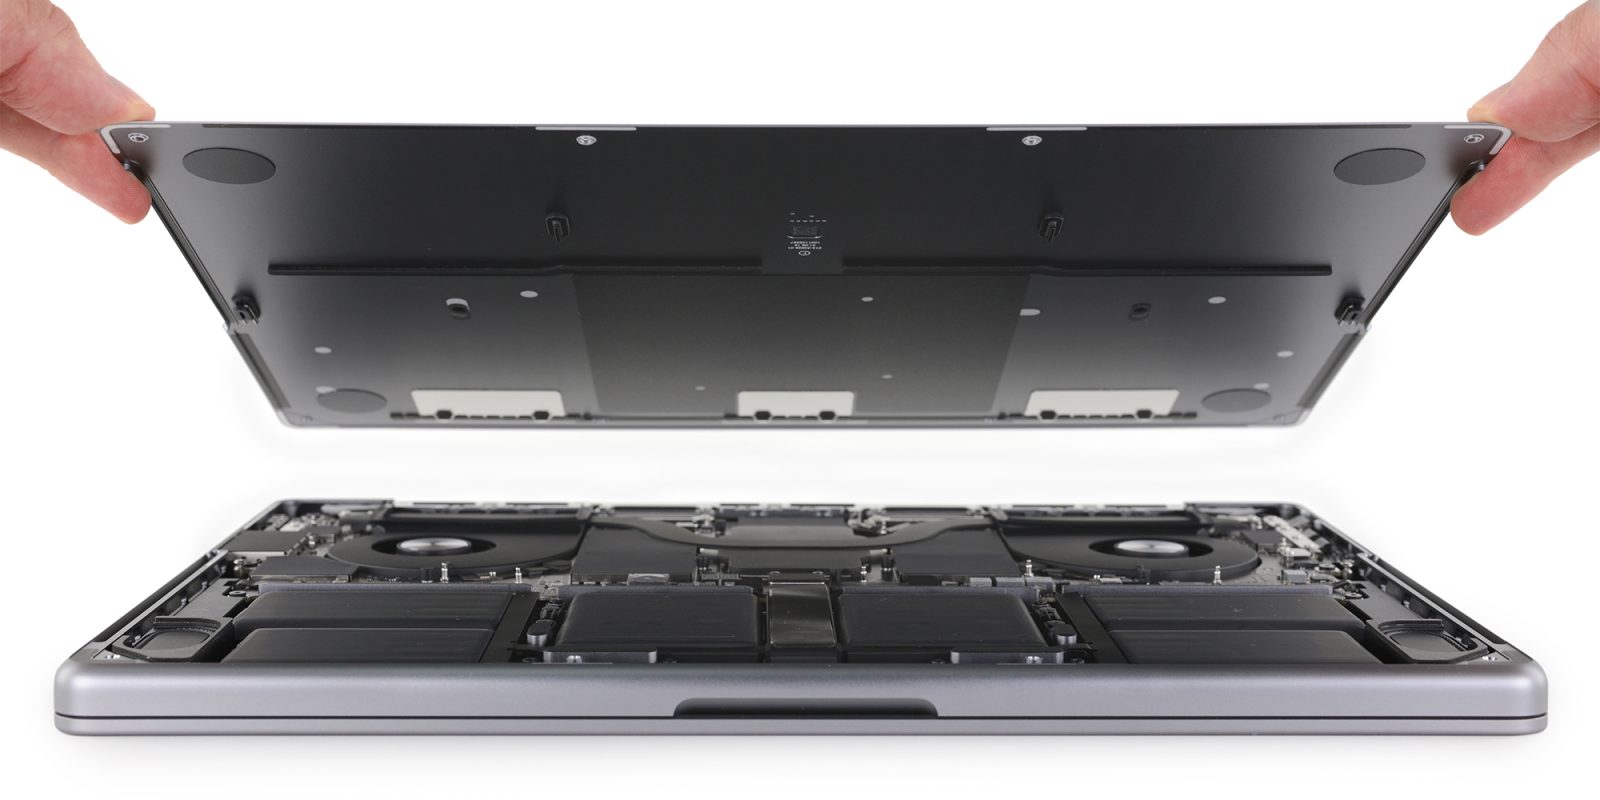 Postimpressionisme Motivere skrive et brev iFixit: New MacBook Pro has first 'DIY-friendly' battery replacement design  since 2012 - 9to5Mac